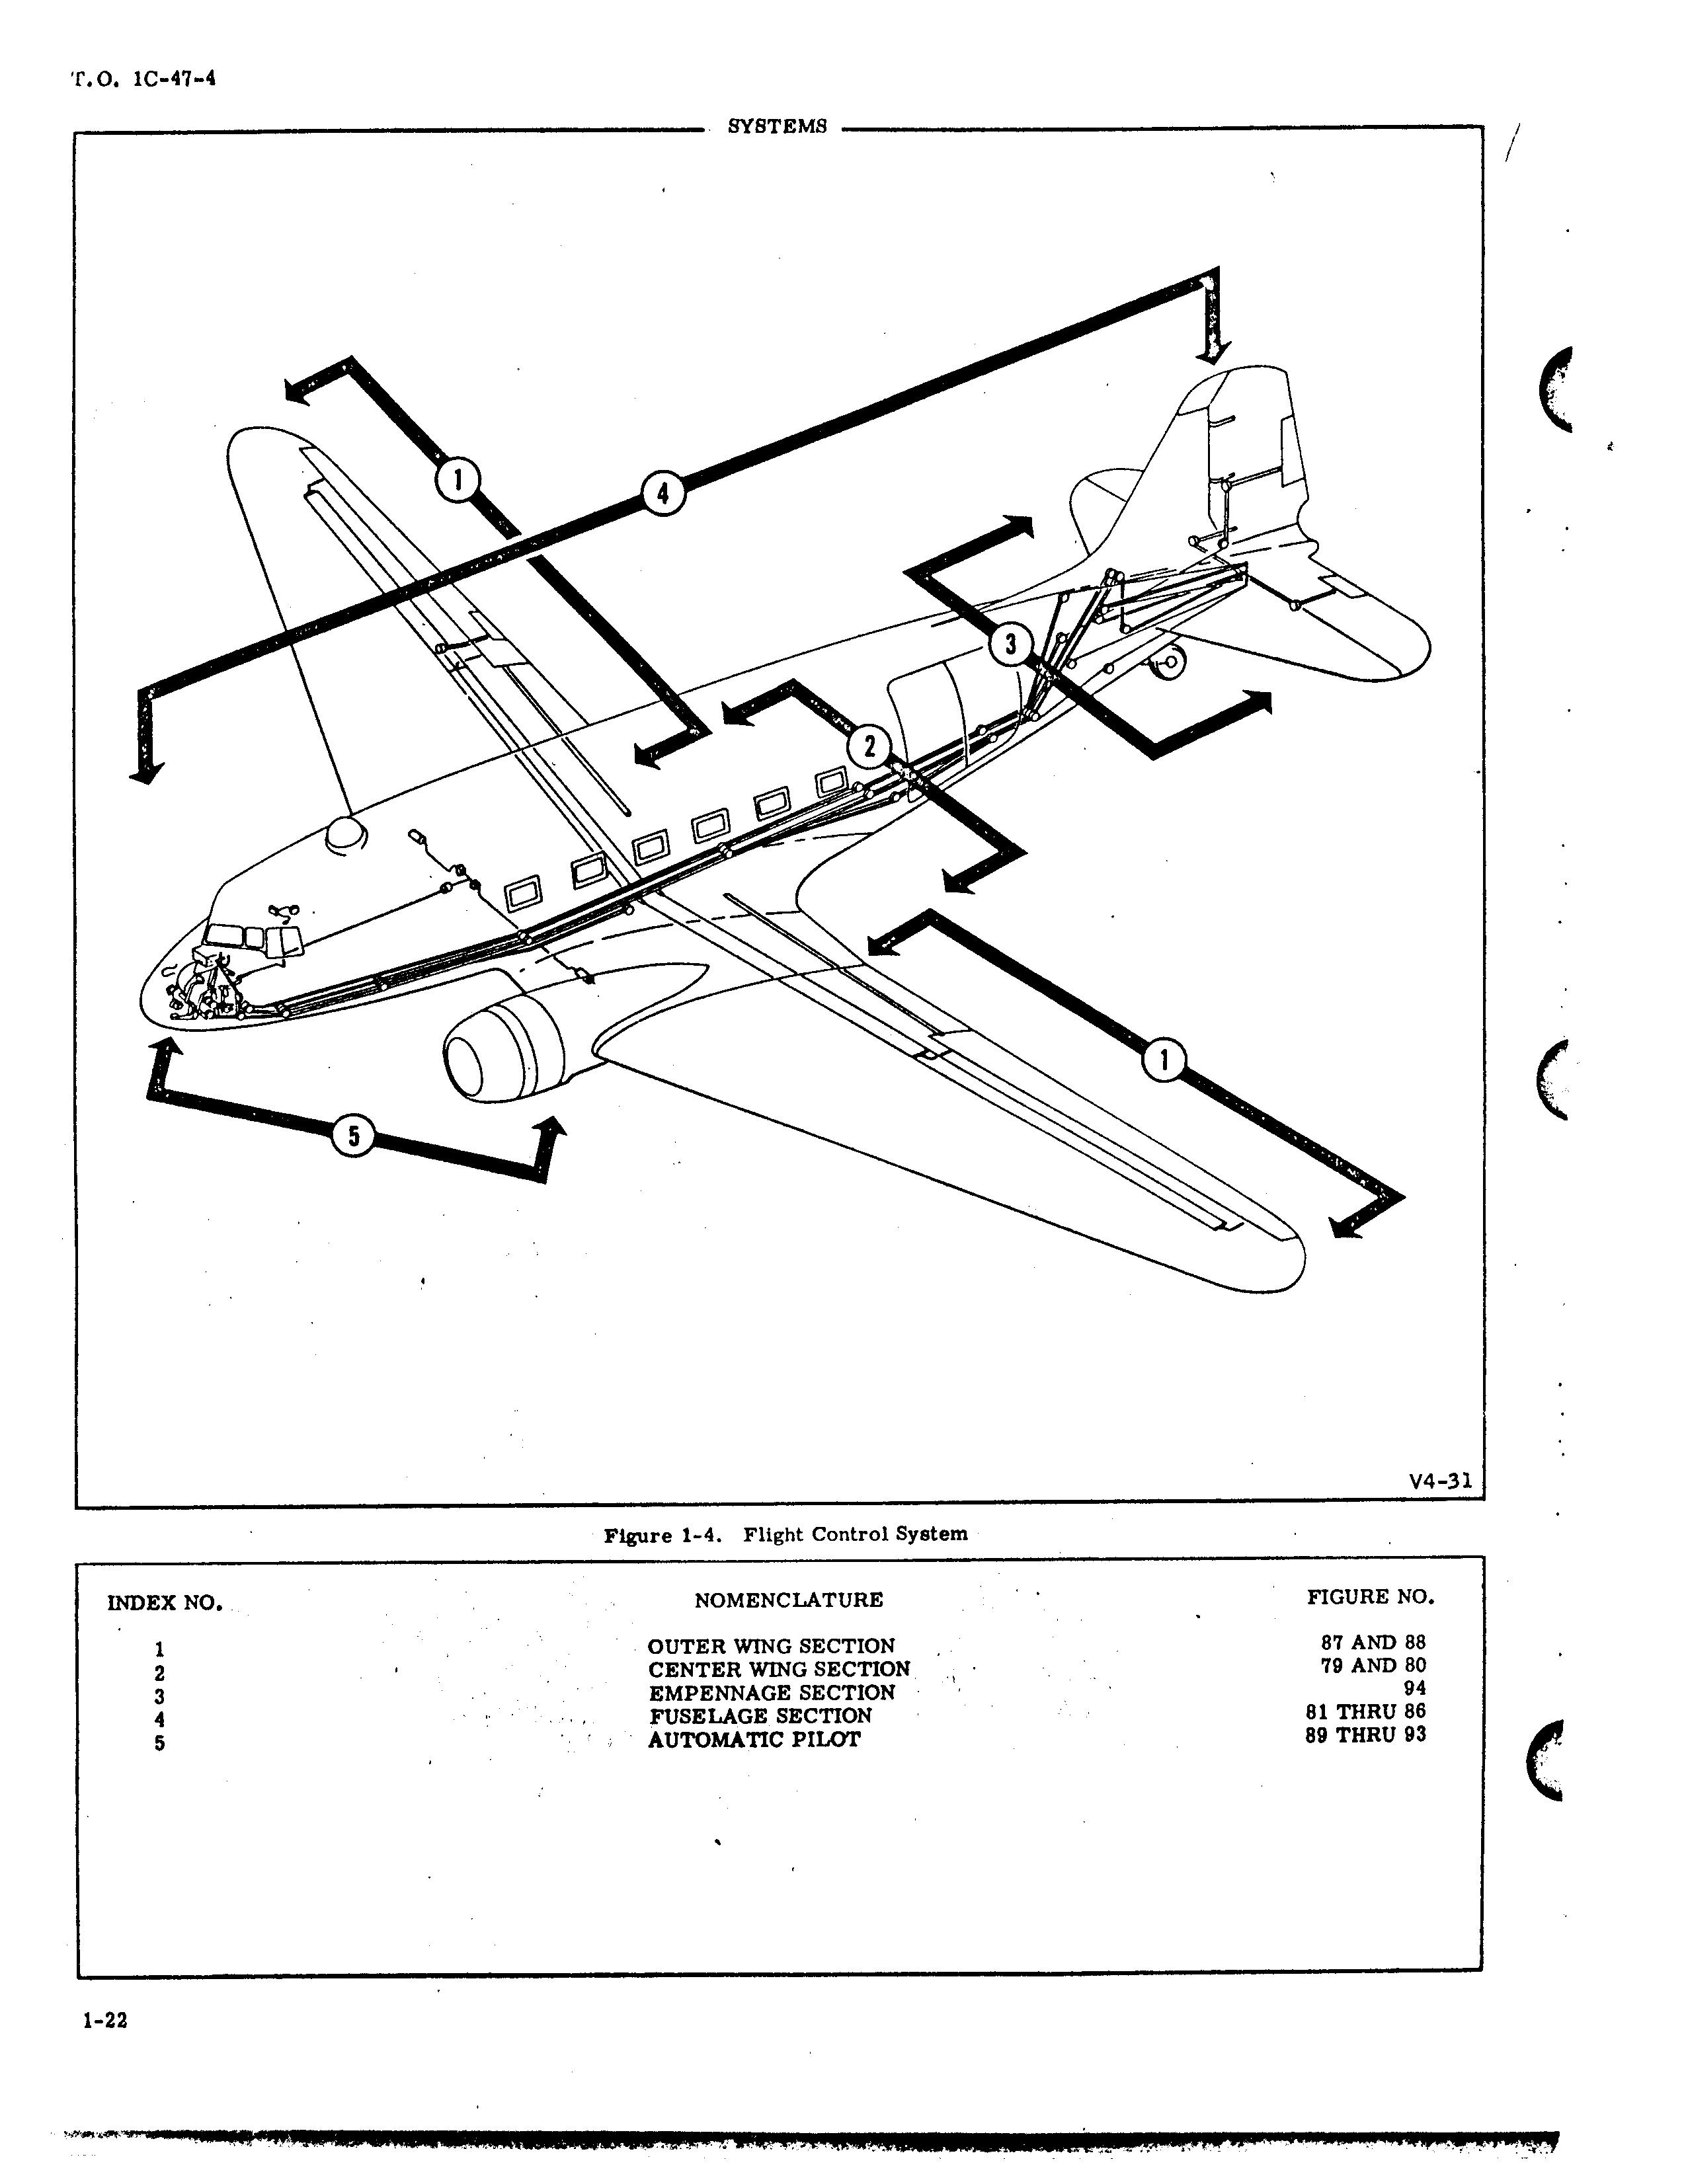 Sample page 36 from AirCorps Library document: Illustrated Parts Breakdown for C-47A, C-47B, C-47D, C-117A, and C-117B